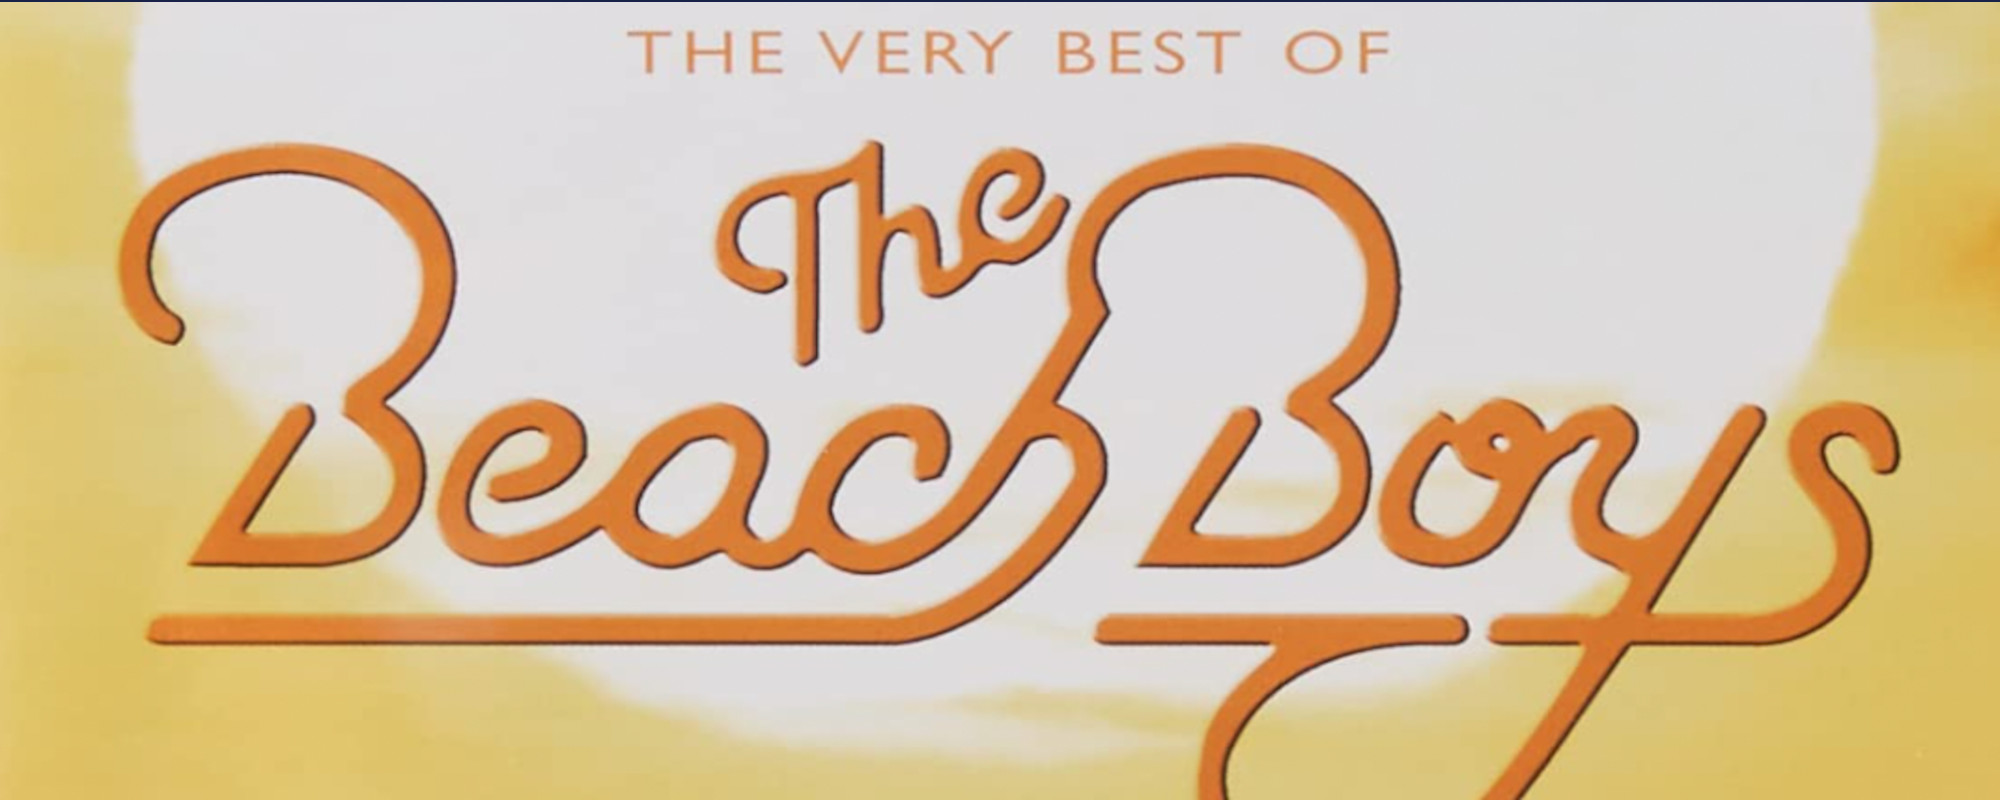 Review: ‘The Very Best of the Beach Boys’—A Remarkable Return to the American Dream